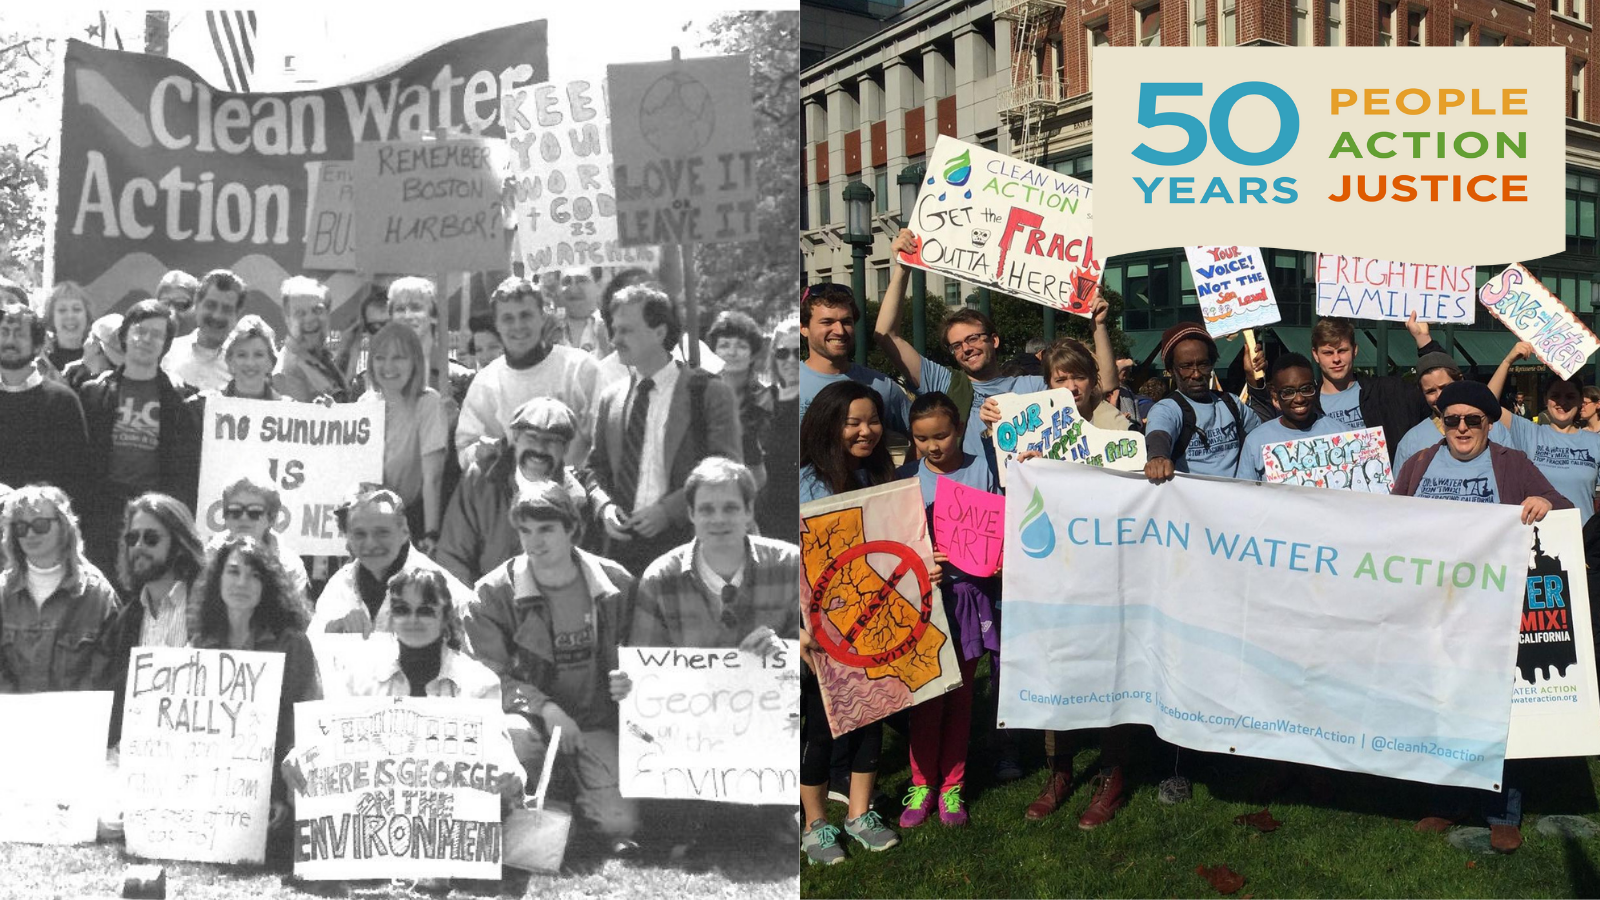 Image: A Clean Water Action Rally in the 80s side by side with a Rally in the 2010s